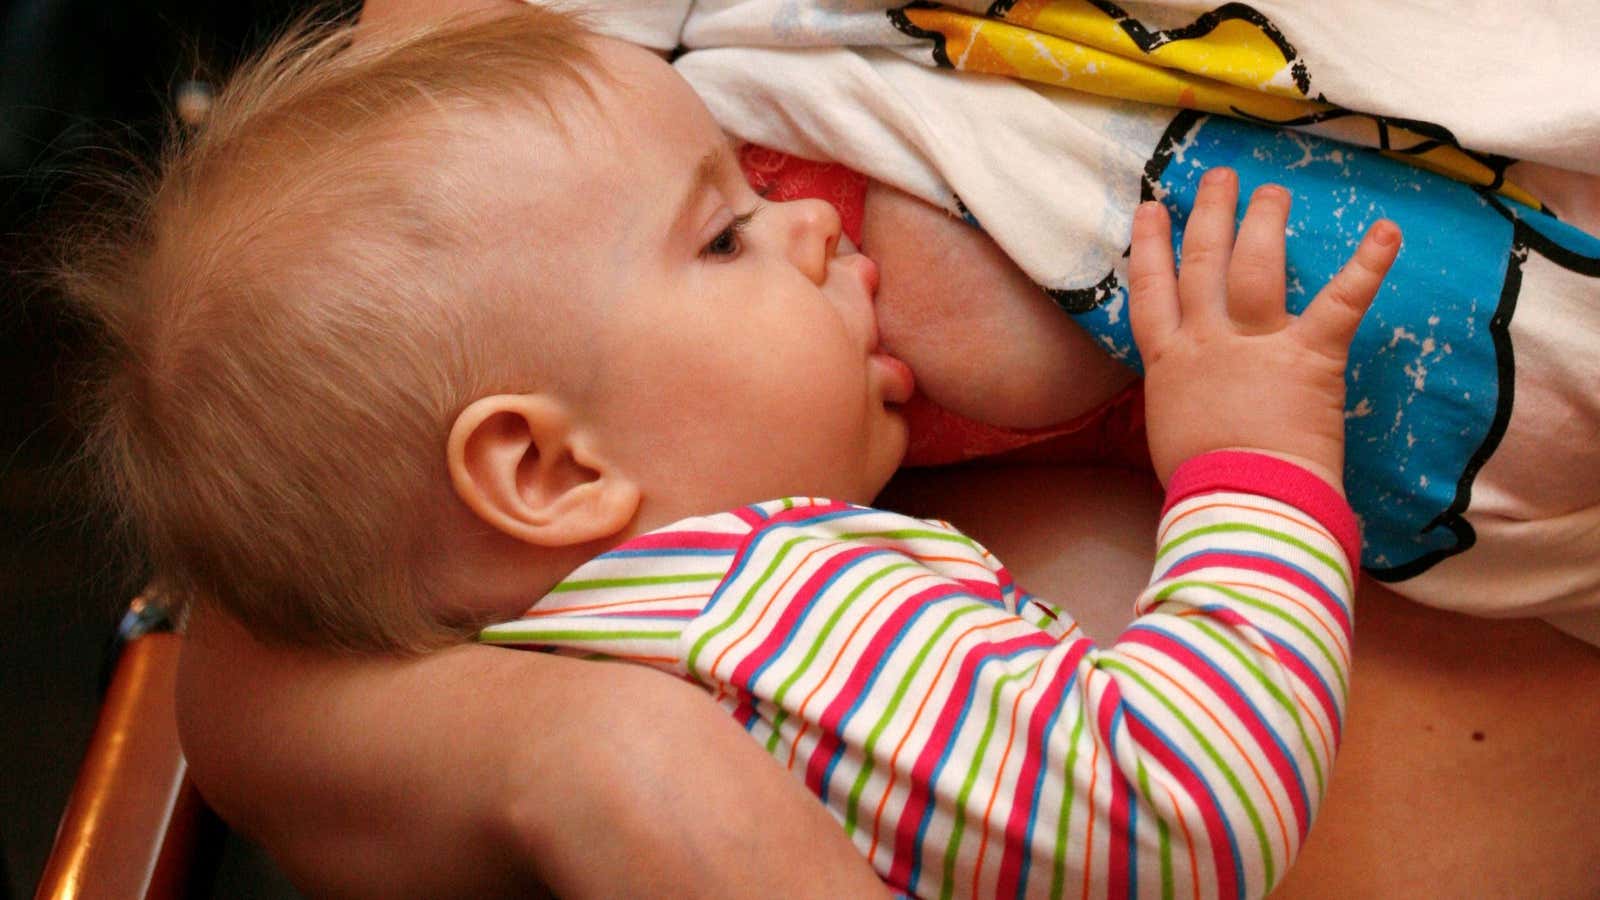 Too many companies are not prepared to support breastfeeding mothers, writes Megan  Oertel.